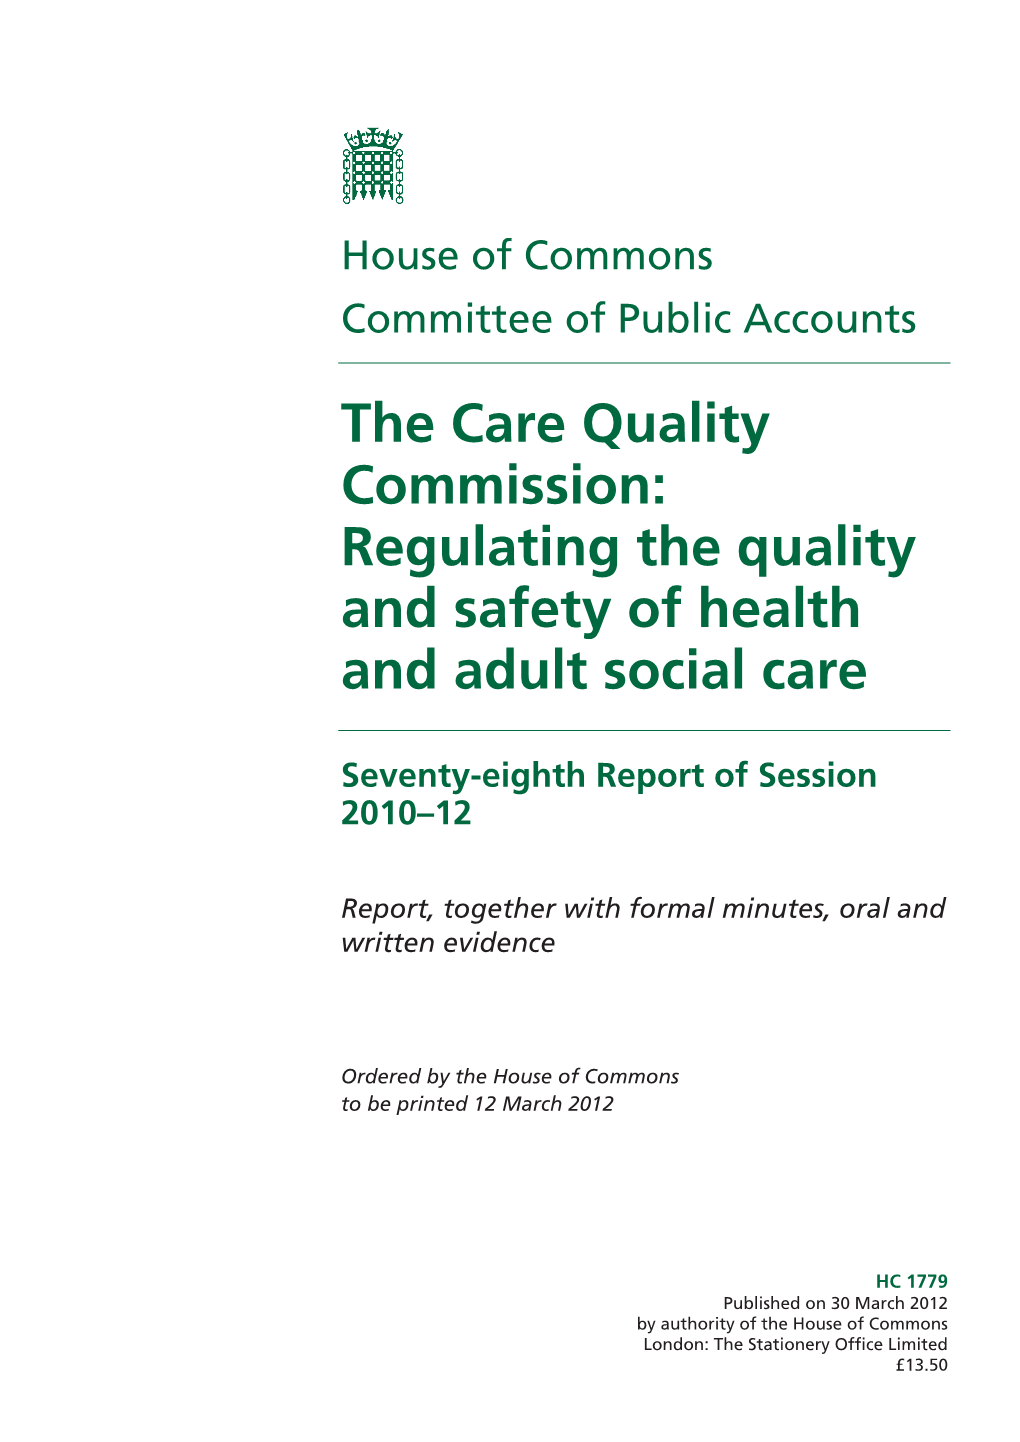 The Care Quality Commission: Regulating the Quality and Safety of Health and Adult Social Care